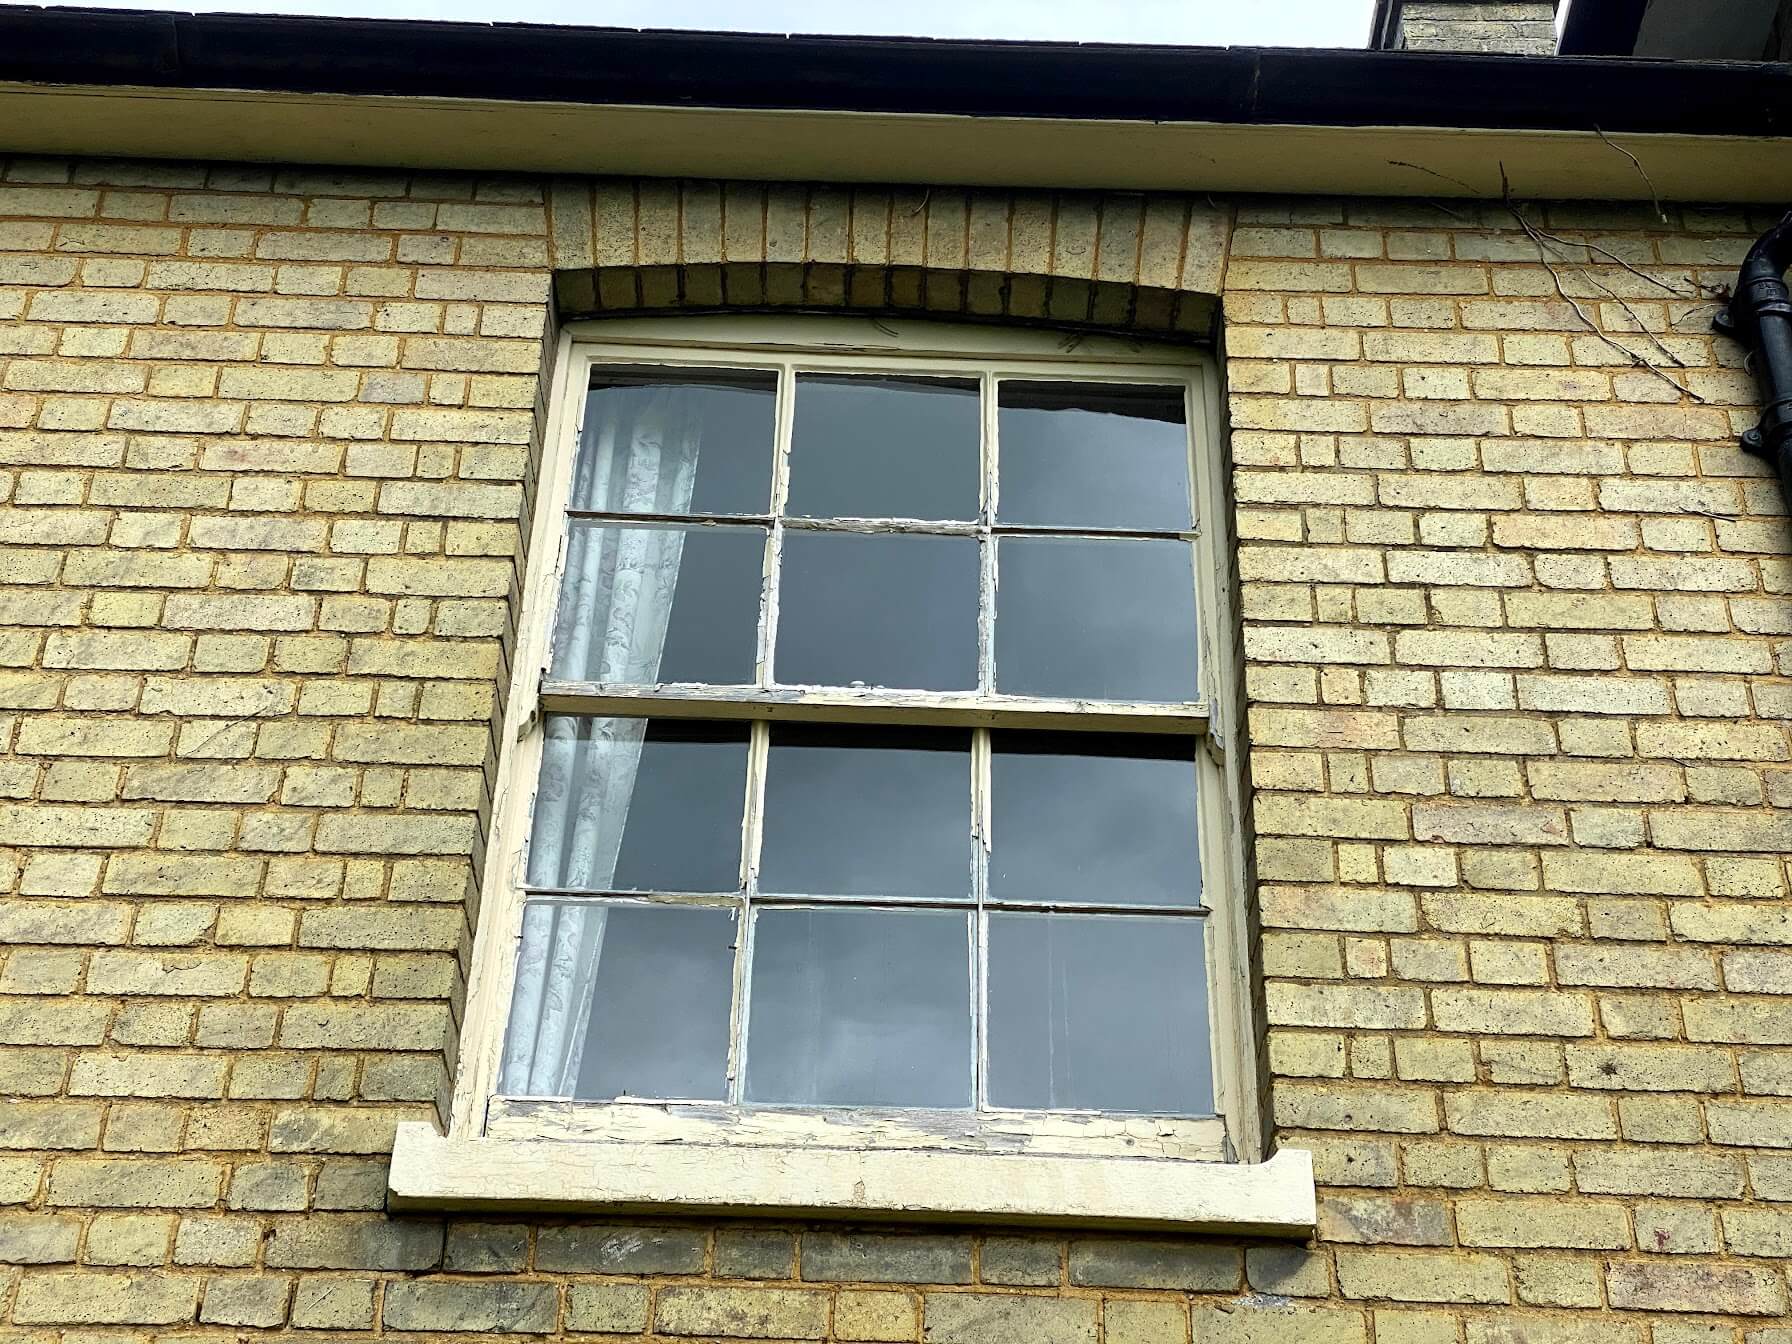 Sash Windows: Structure and Key Elements